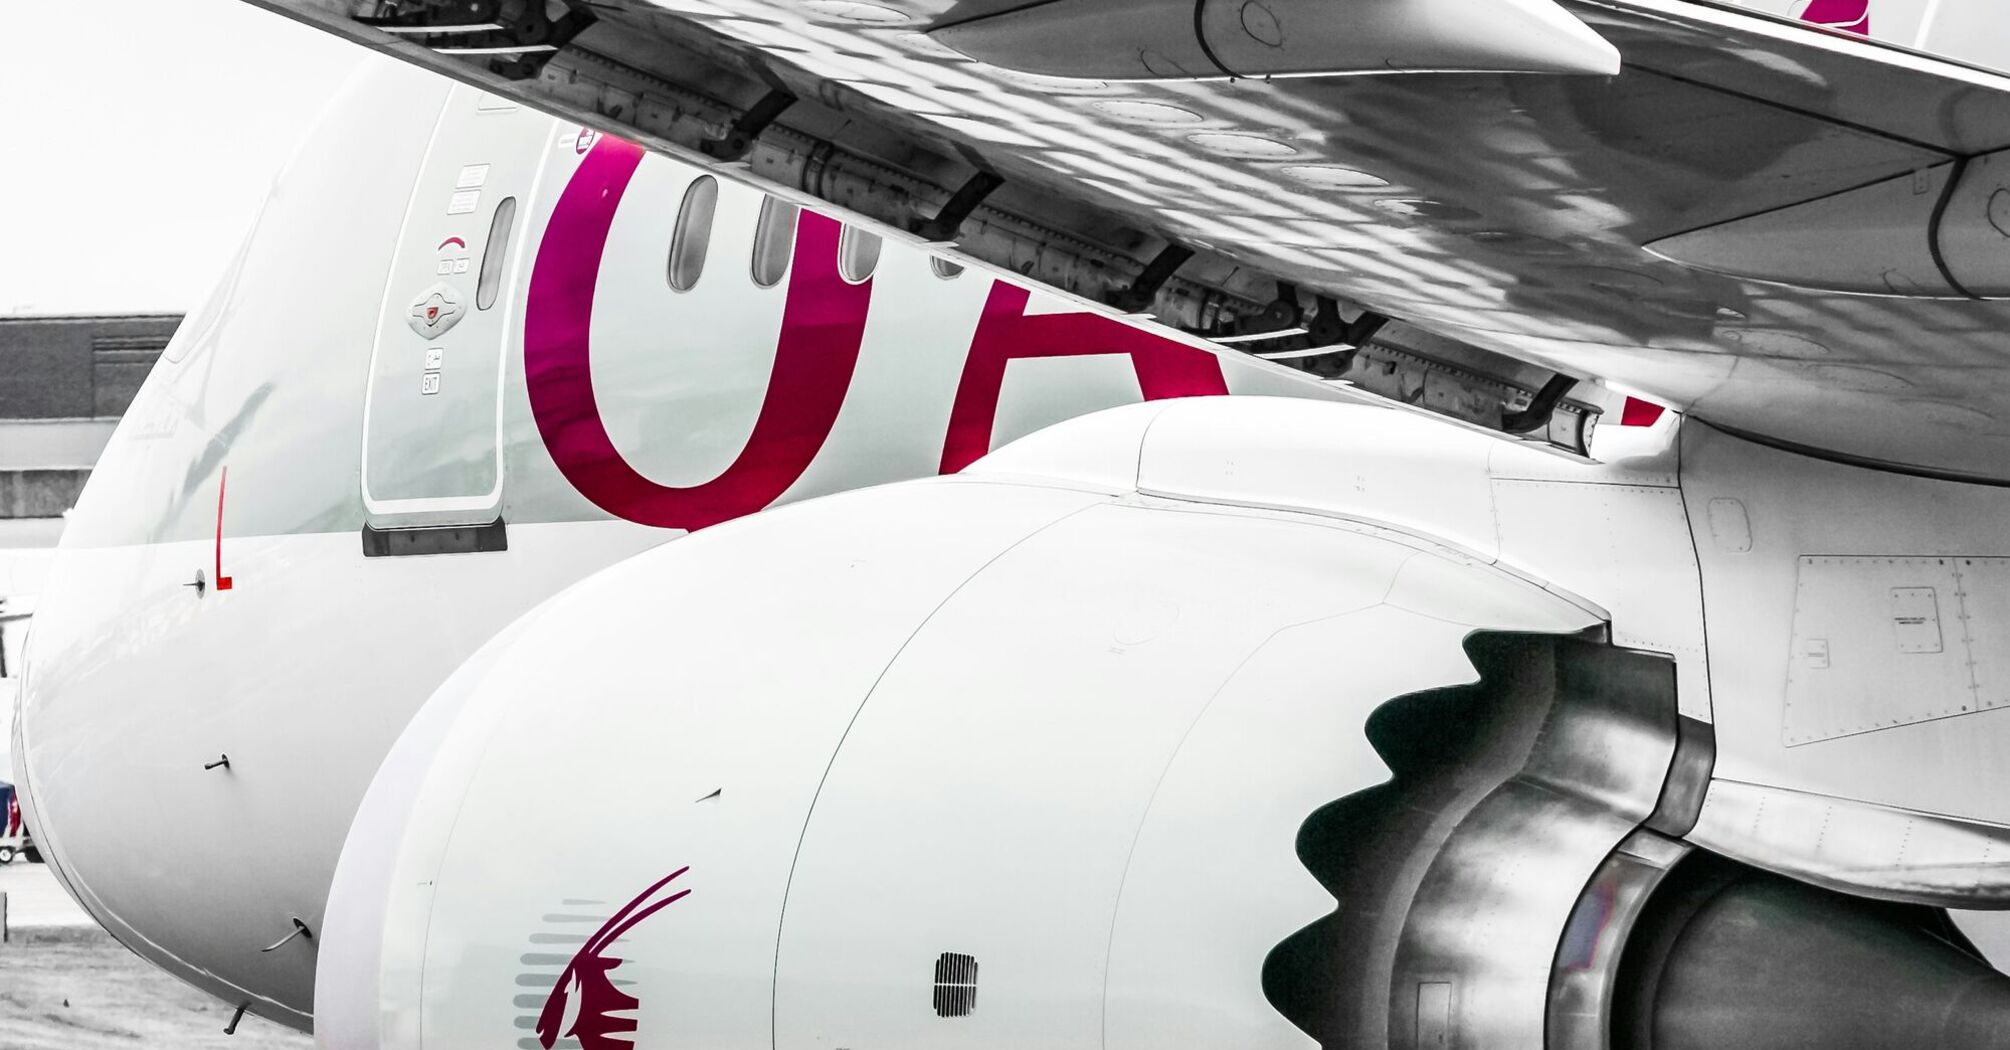 A close-up photograph of a white aircraft with the engine and part of the wing visible, adorned with the maroon logo of Qatar Airways